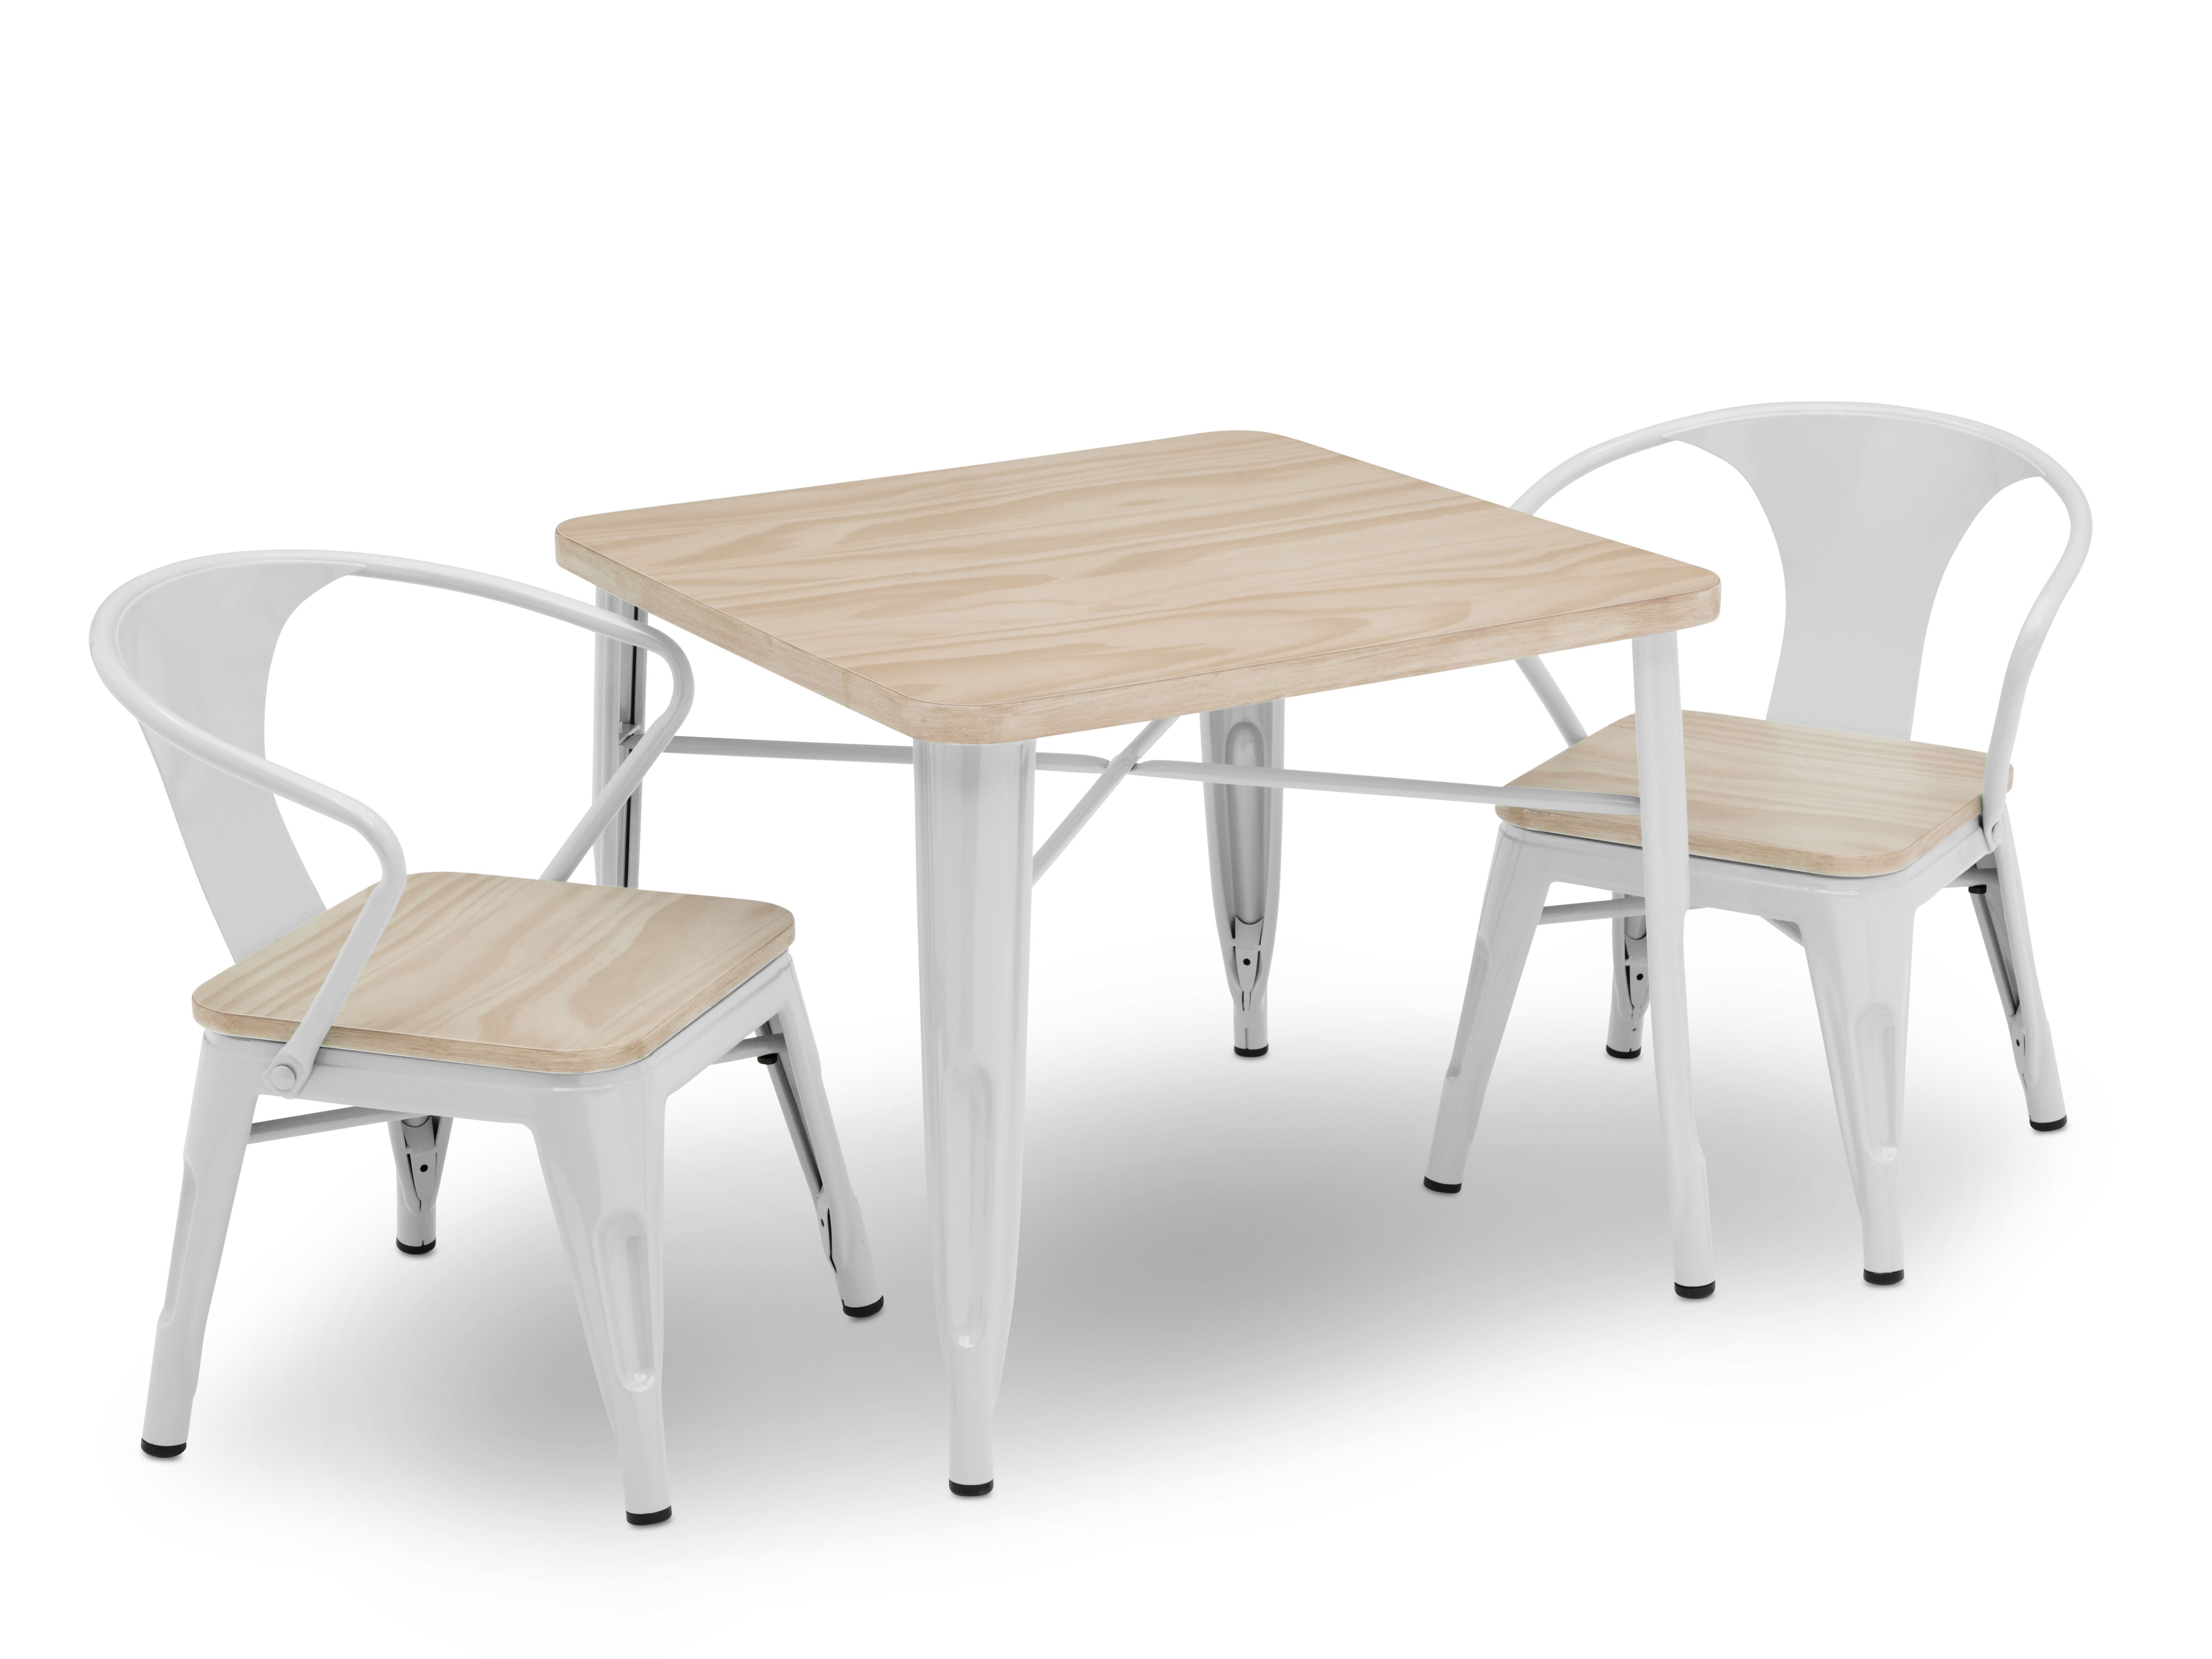 Kids Table And Chair Sets Delta Children